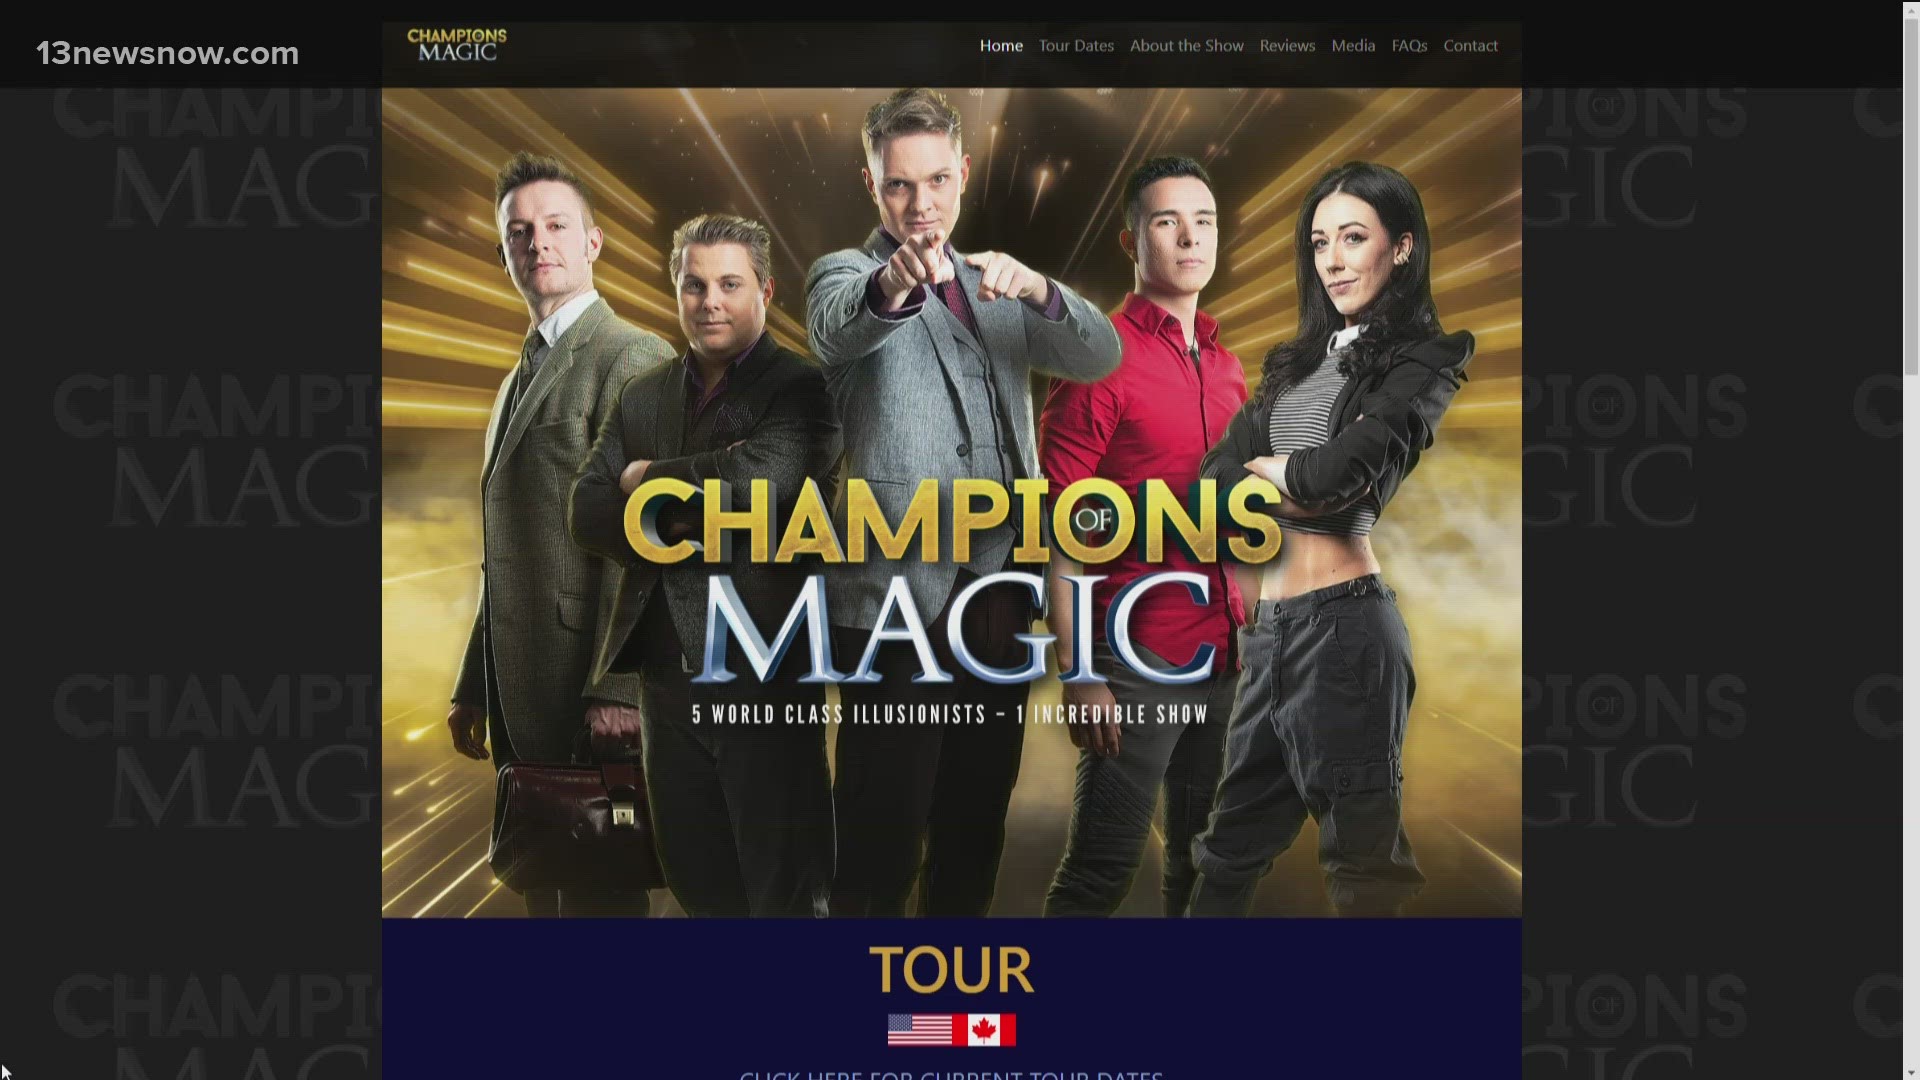 Five illusionists take the stage this weekend for an amazing performance.